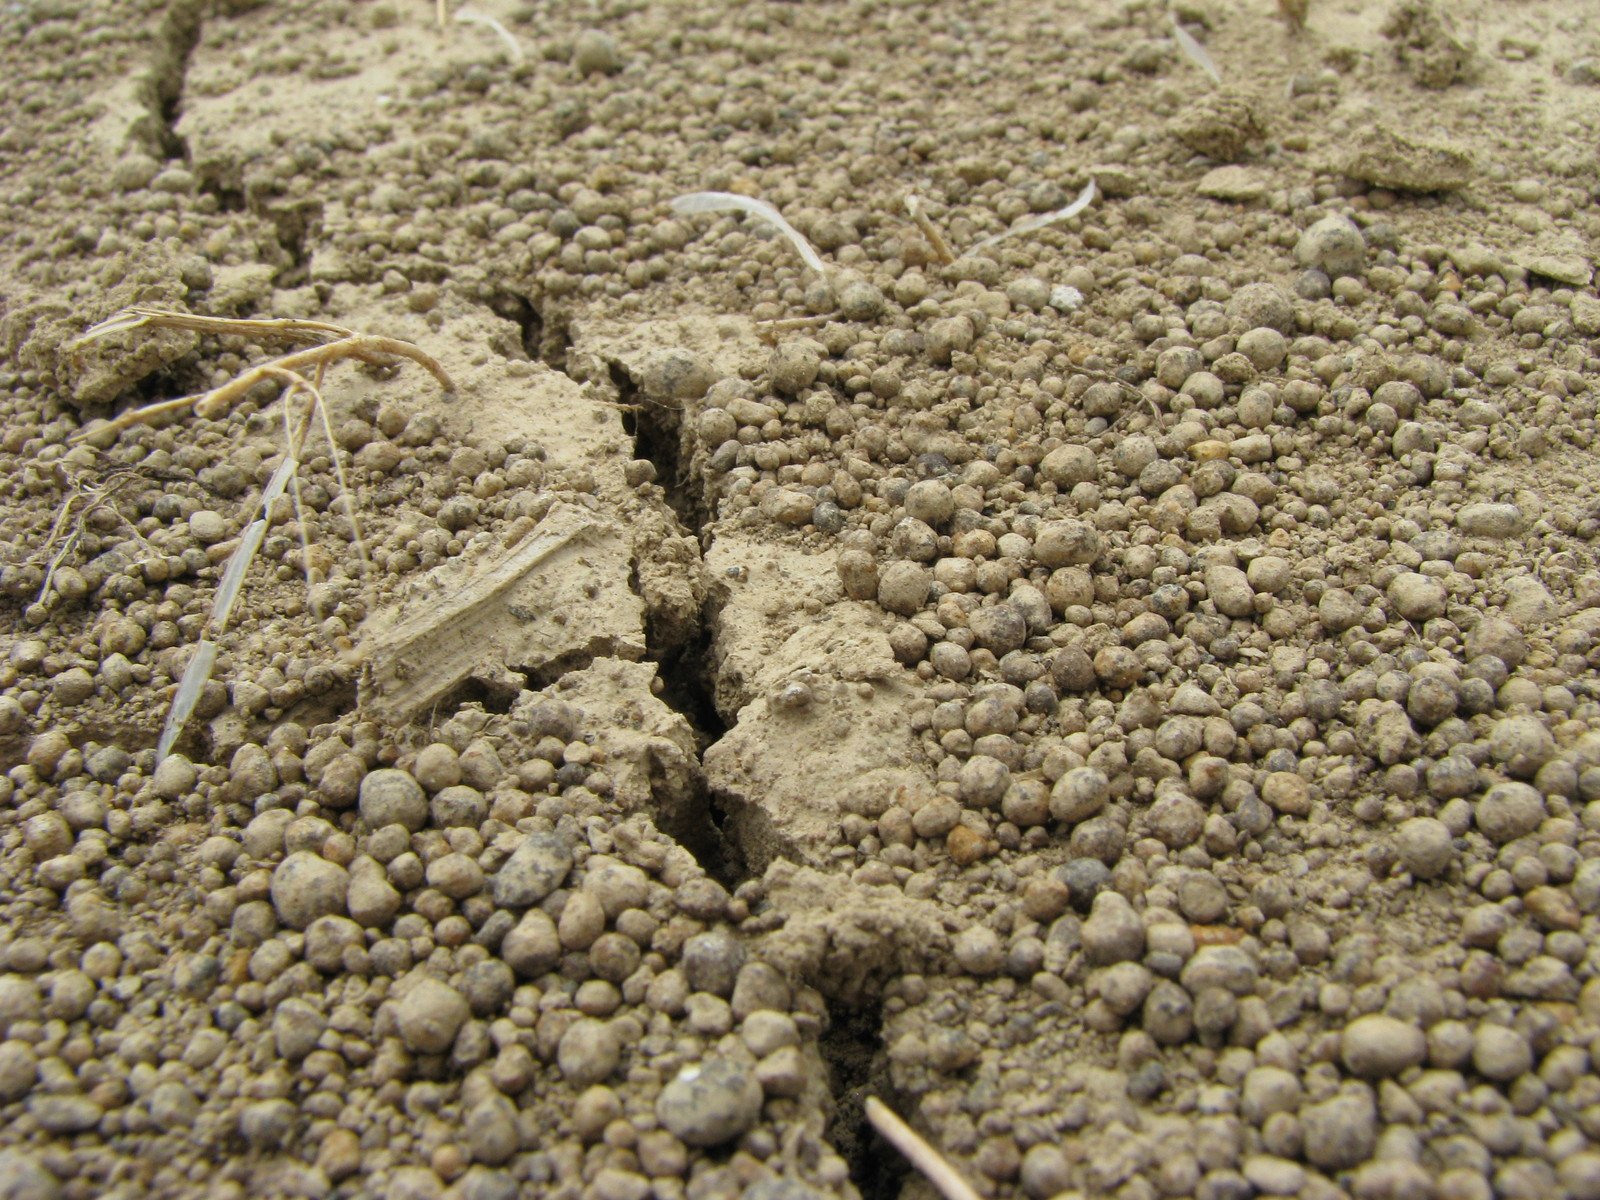 a dirt surface is full of small rocks